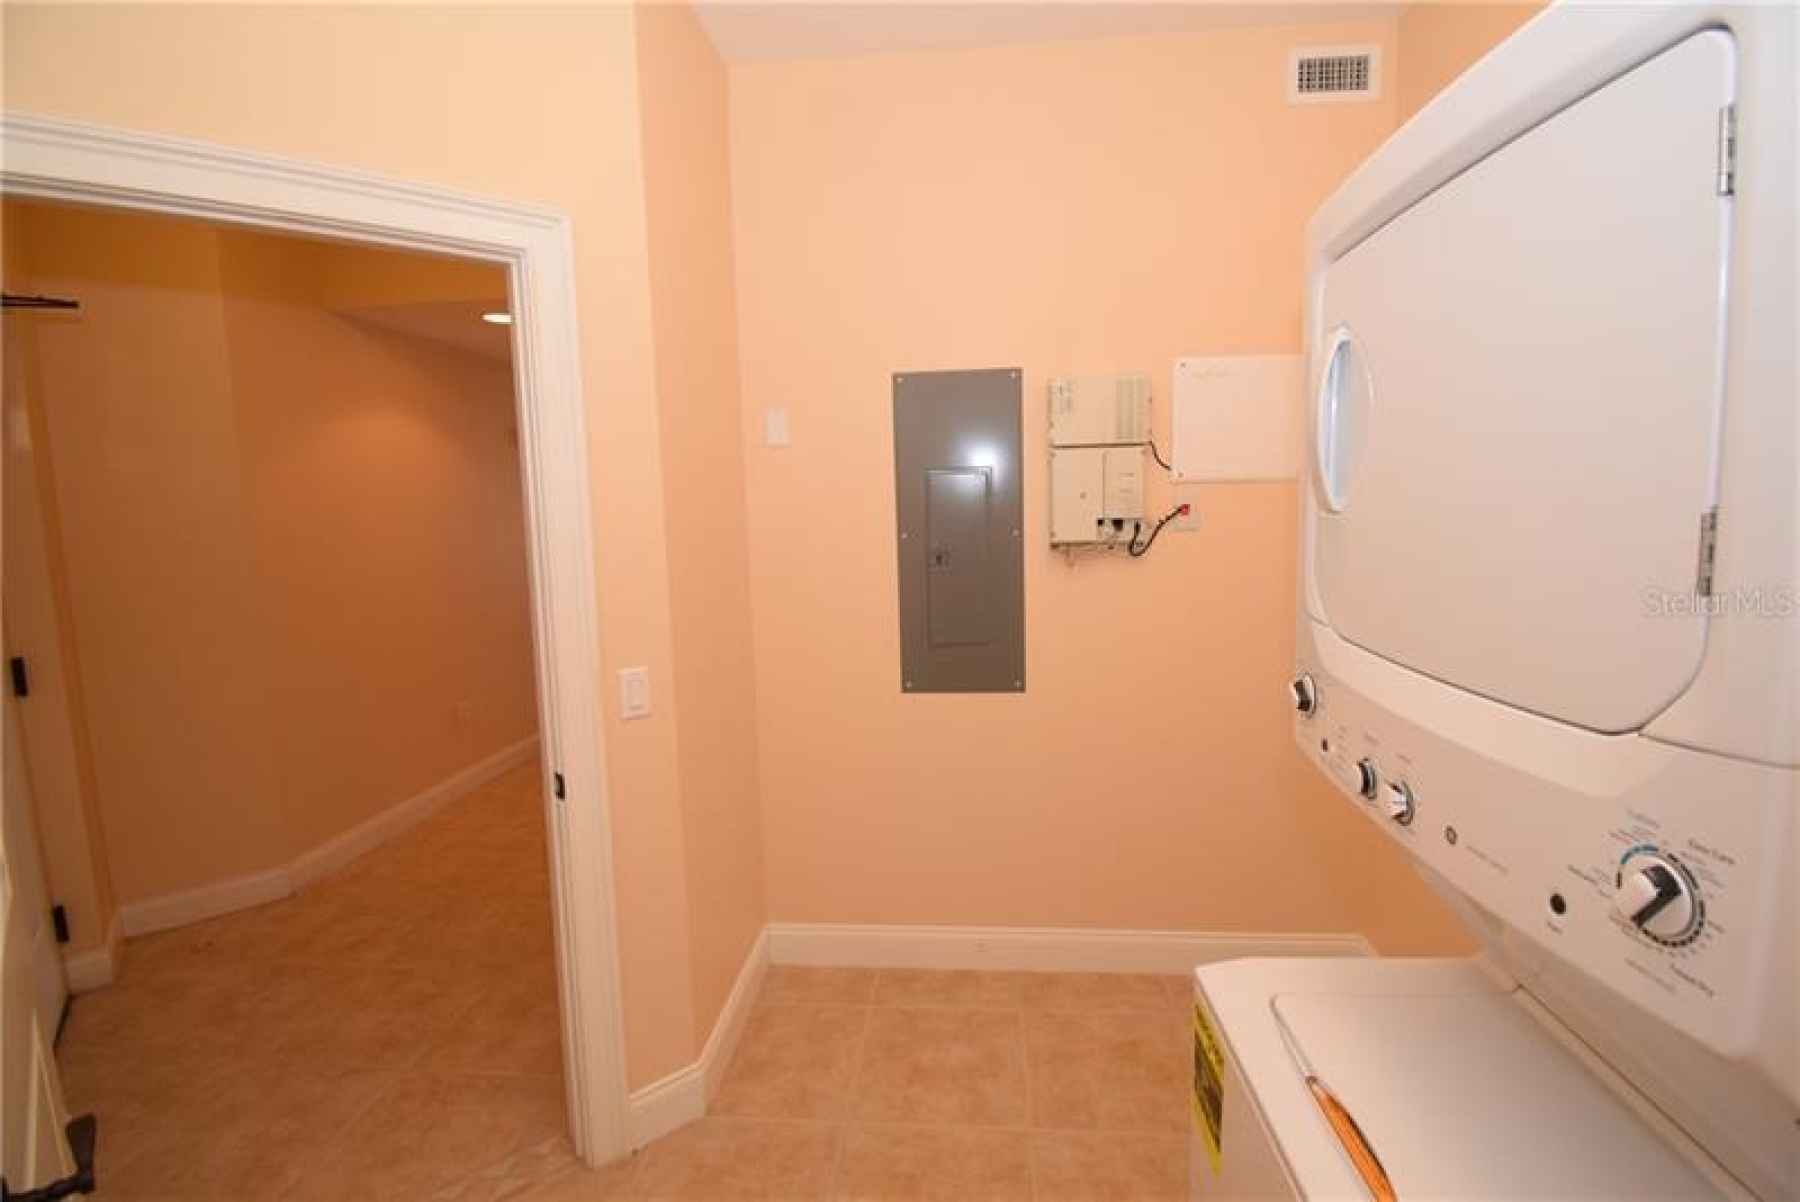 Laundry/utility, ample storage space.